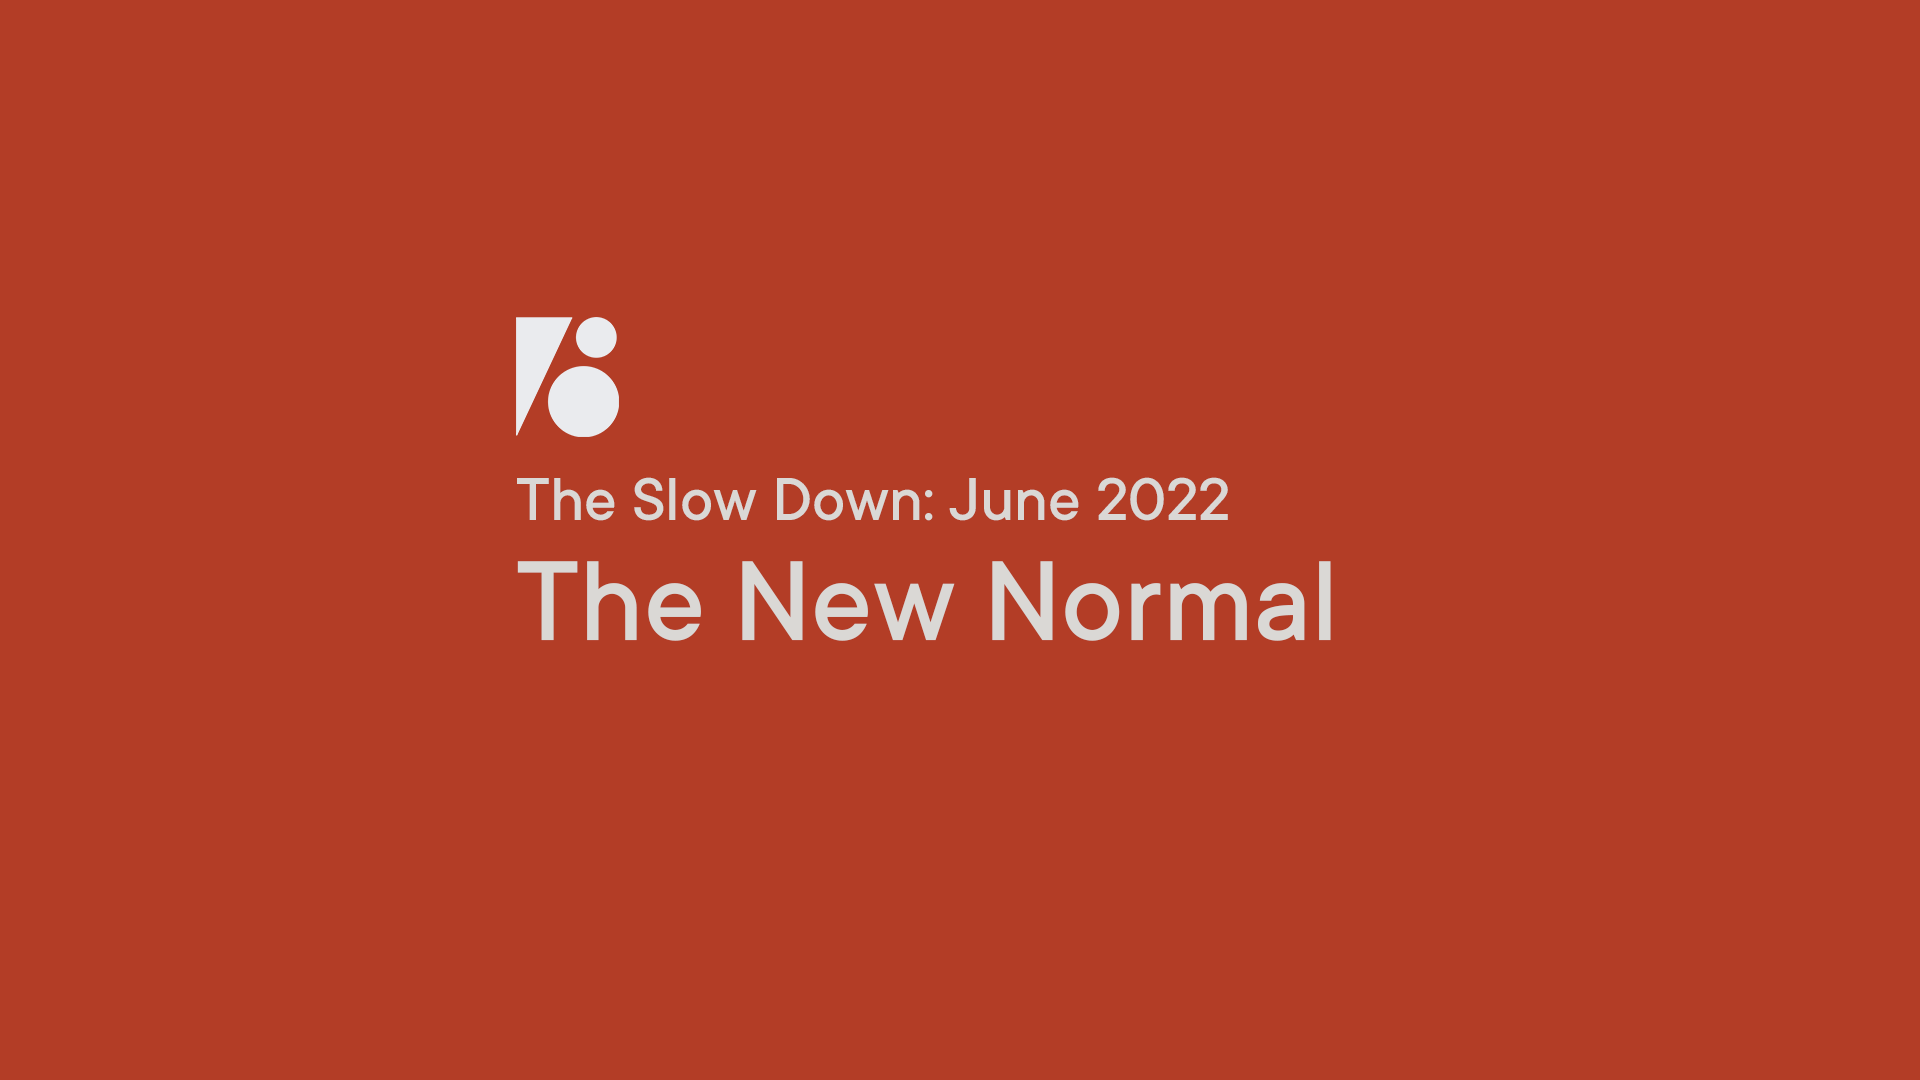 The Slow Down: The New Normal